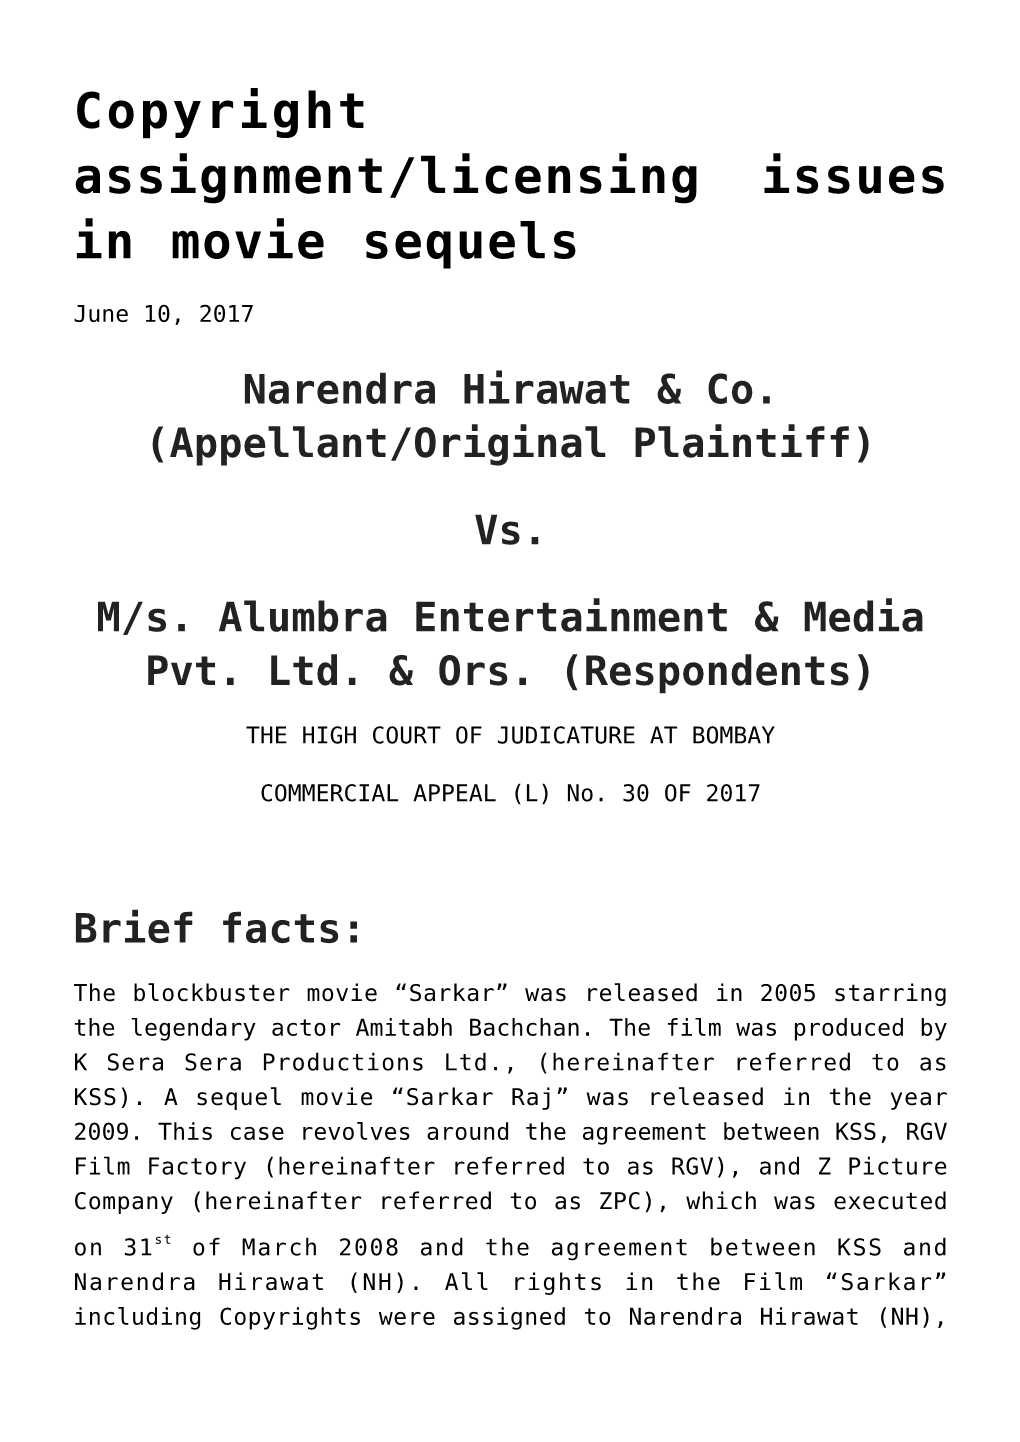 Copyright Assignment/Licensing Issues in Movie Sequels